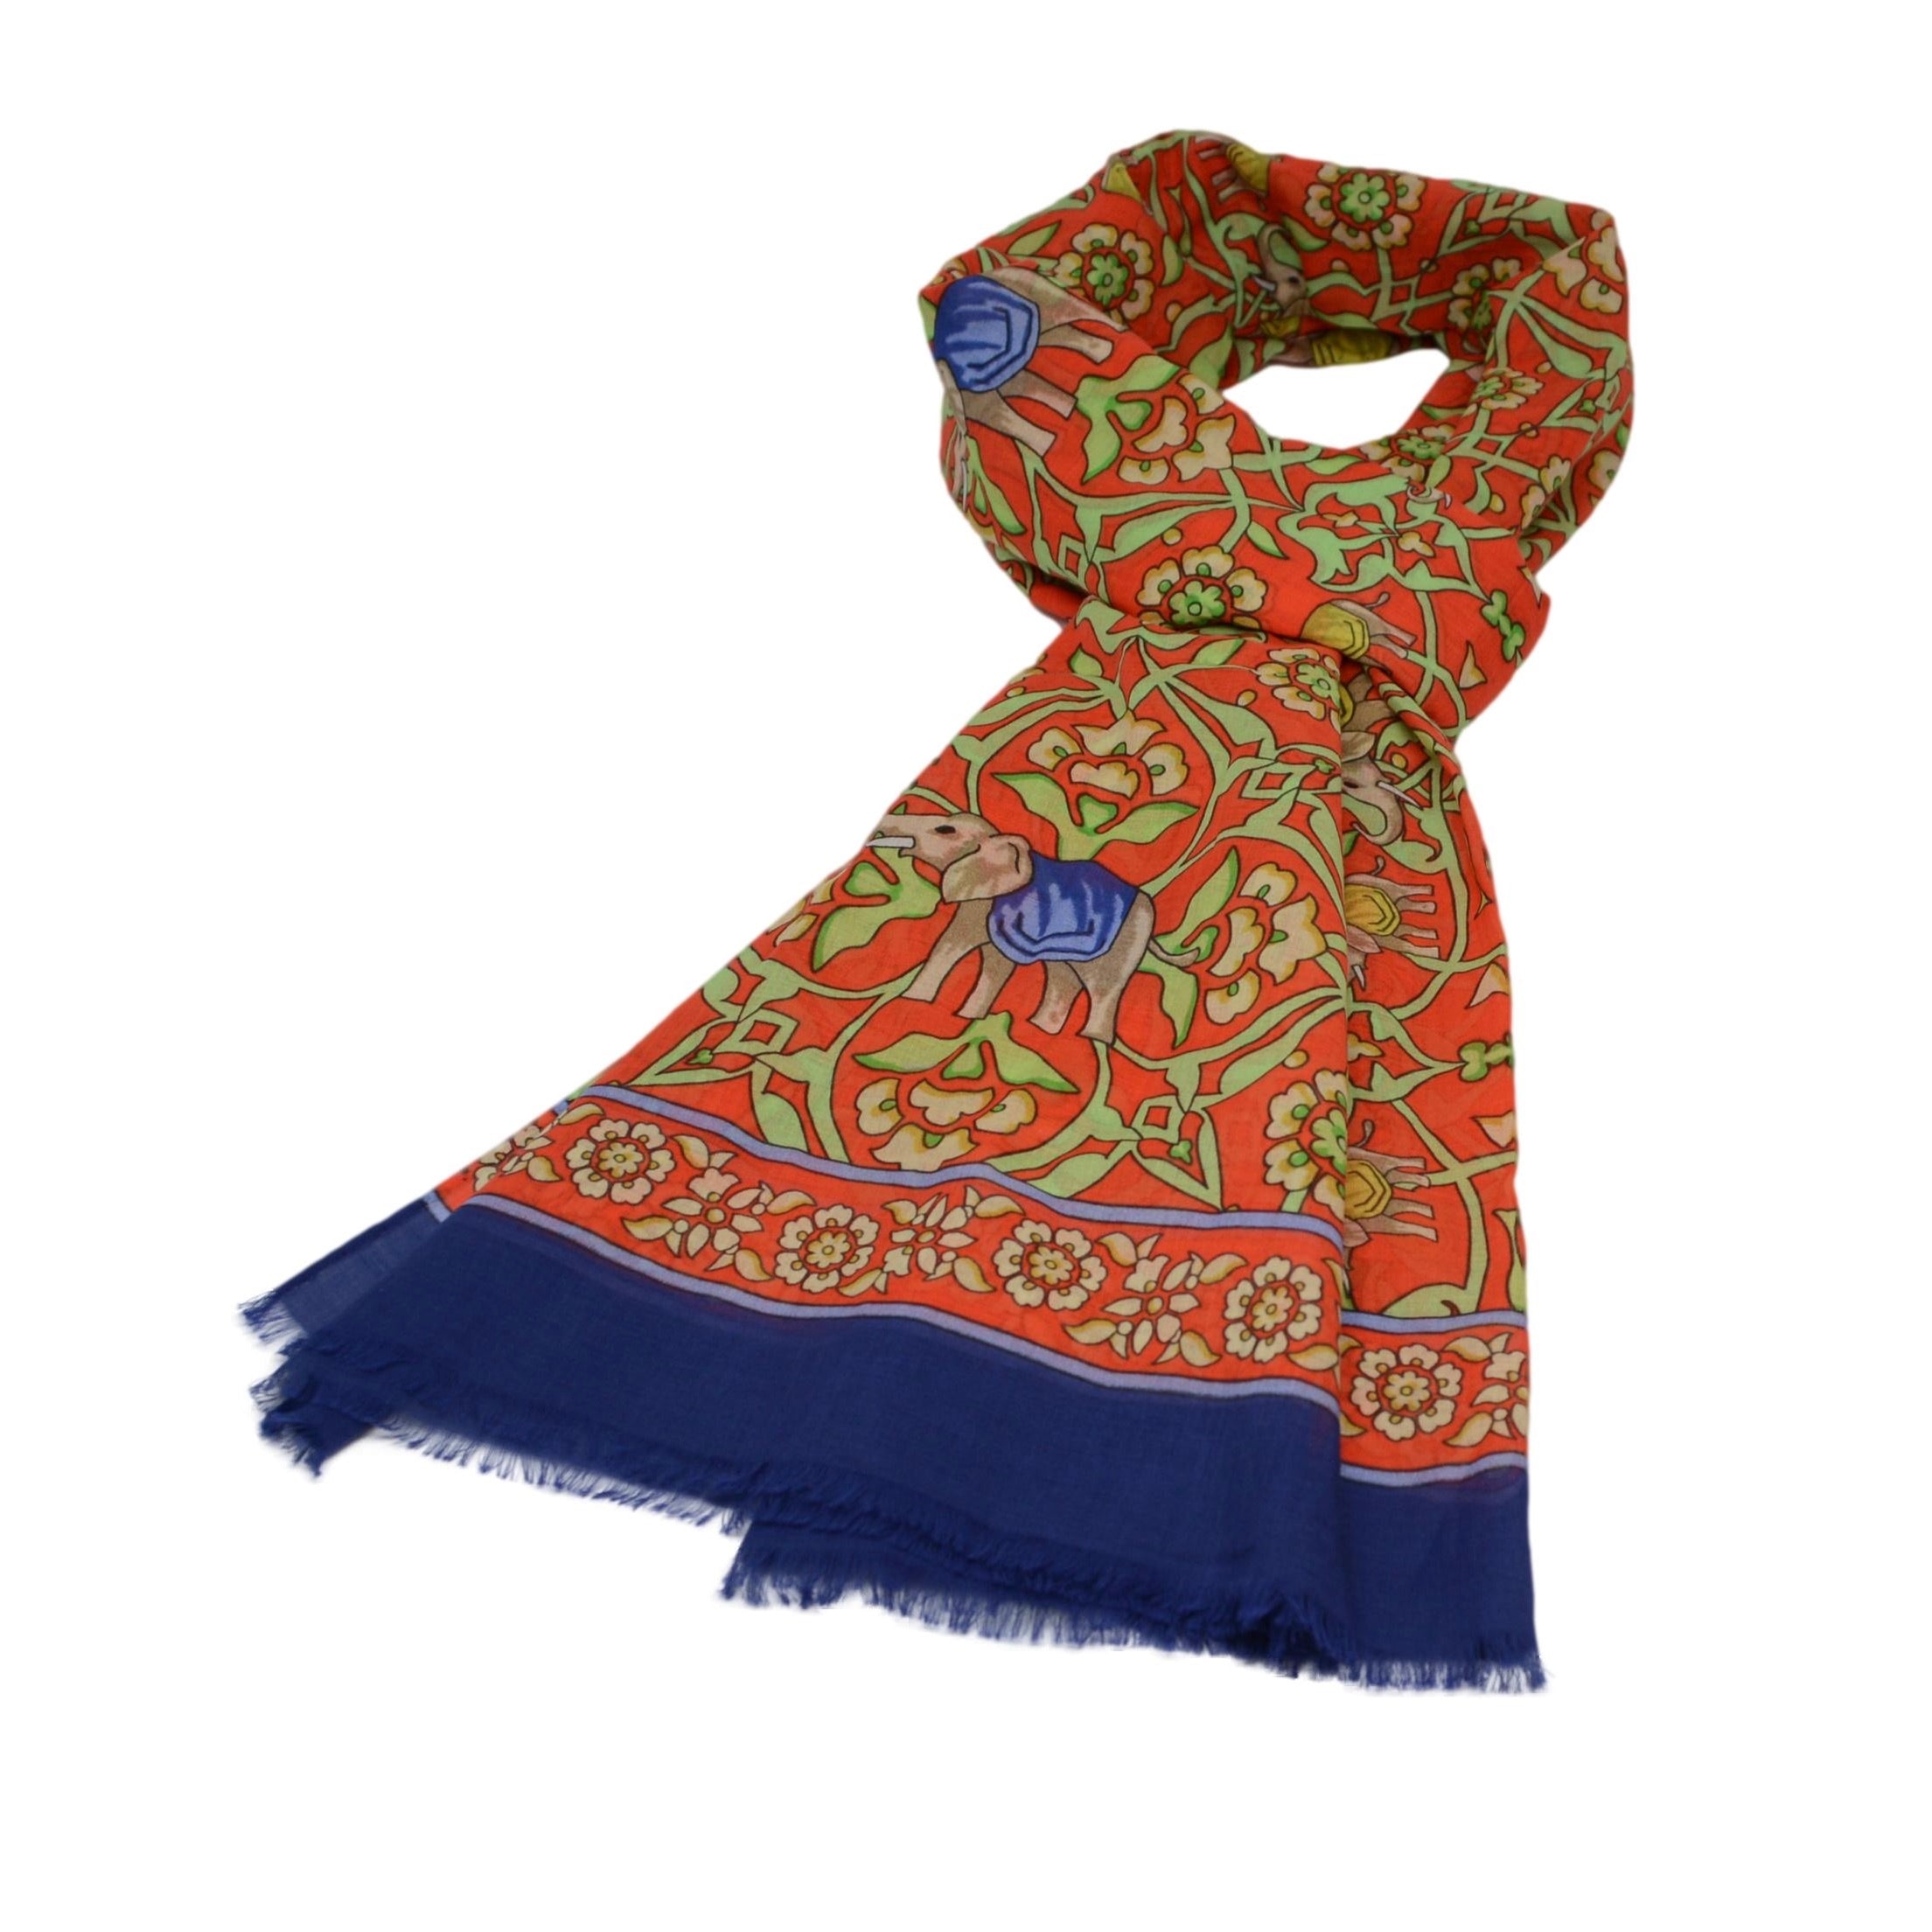 CALABRESE 1924 - SCARF - RED ELEPHANT